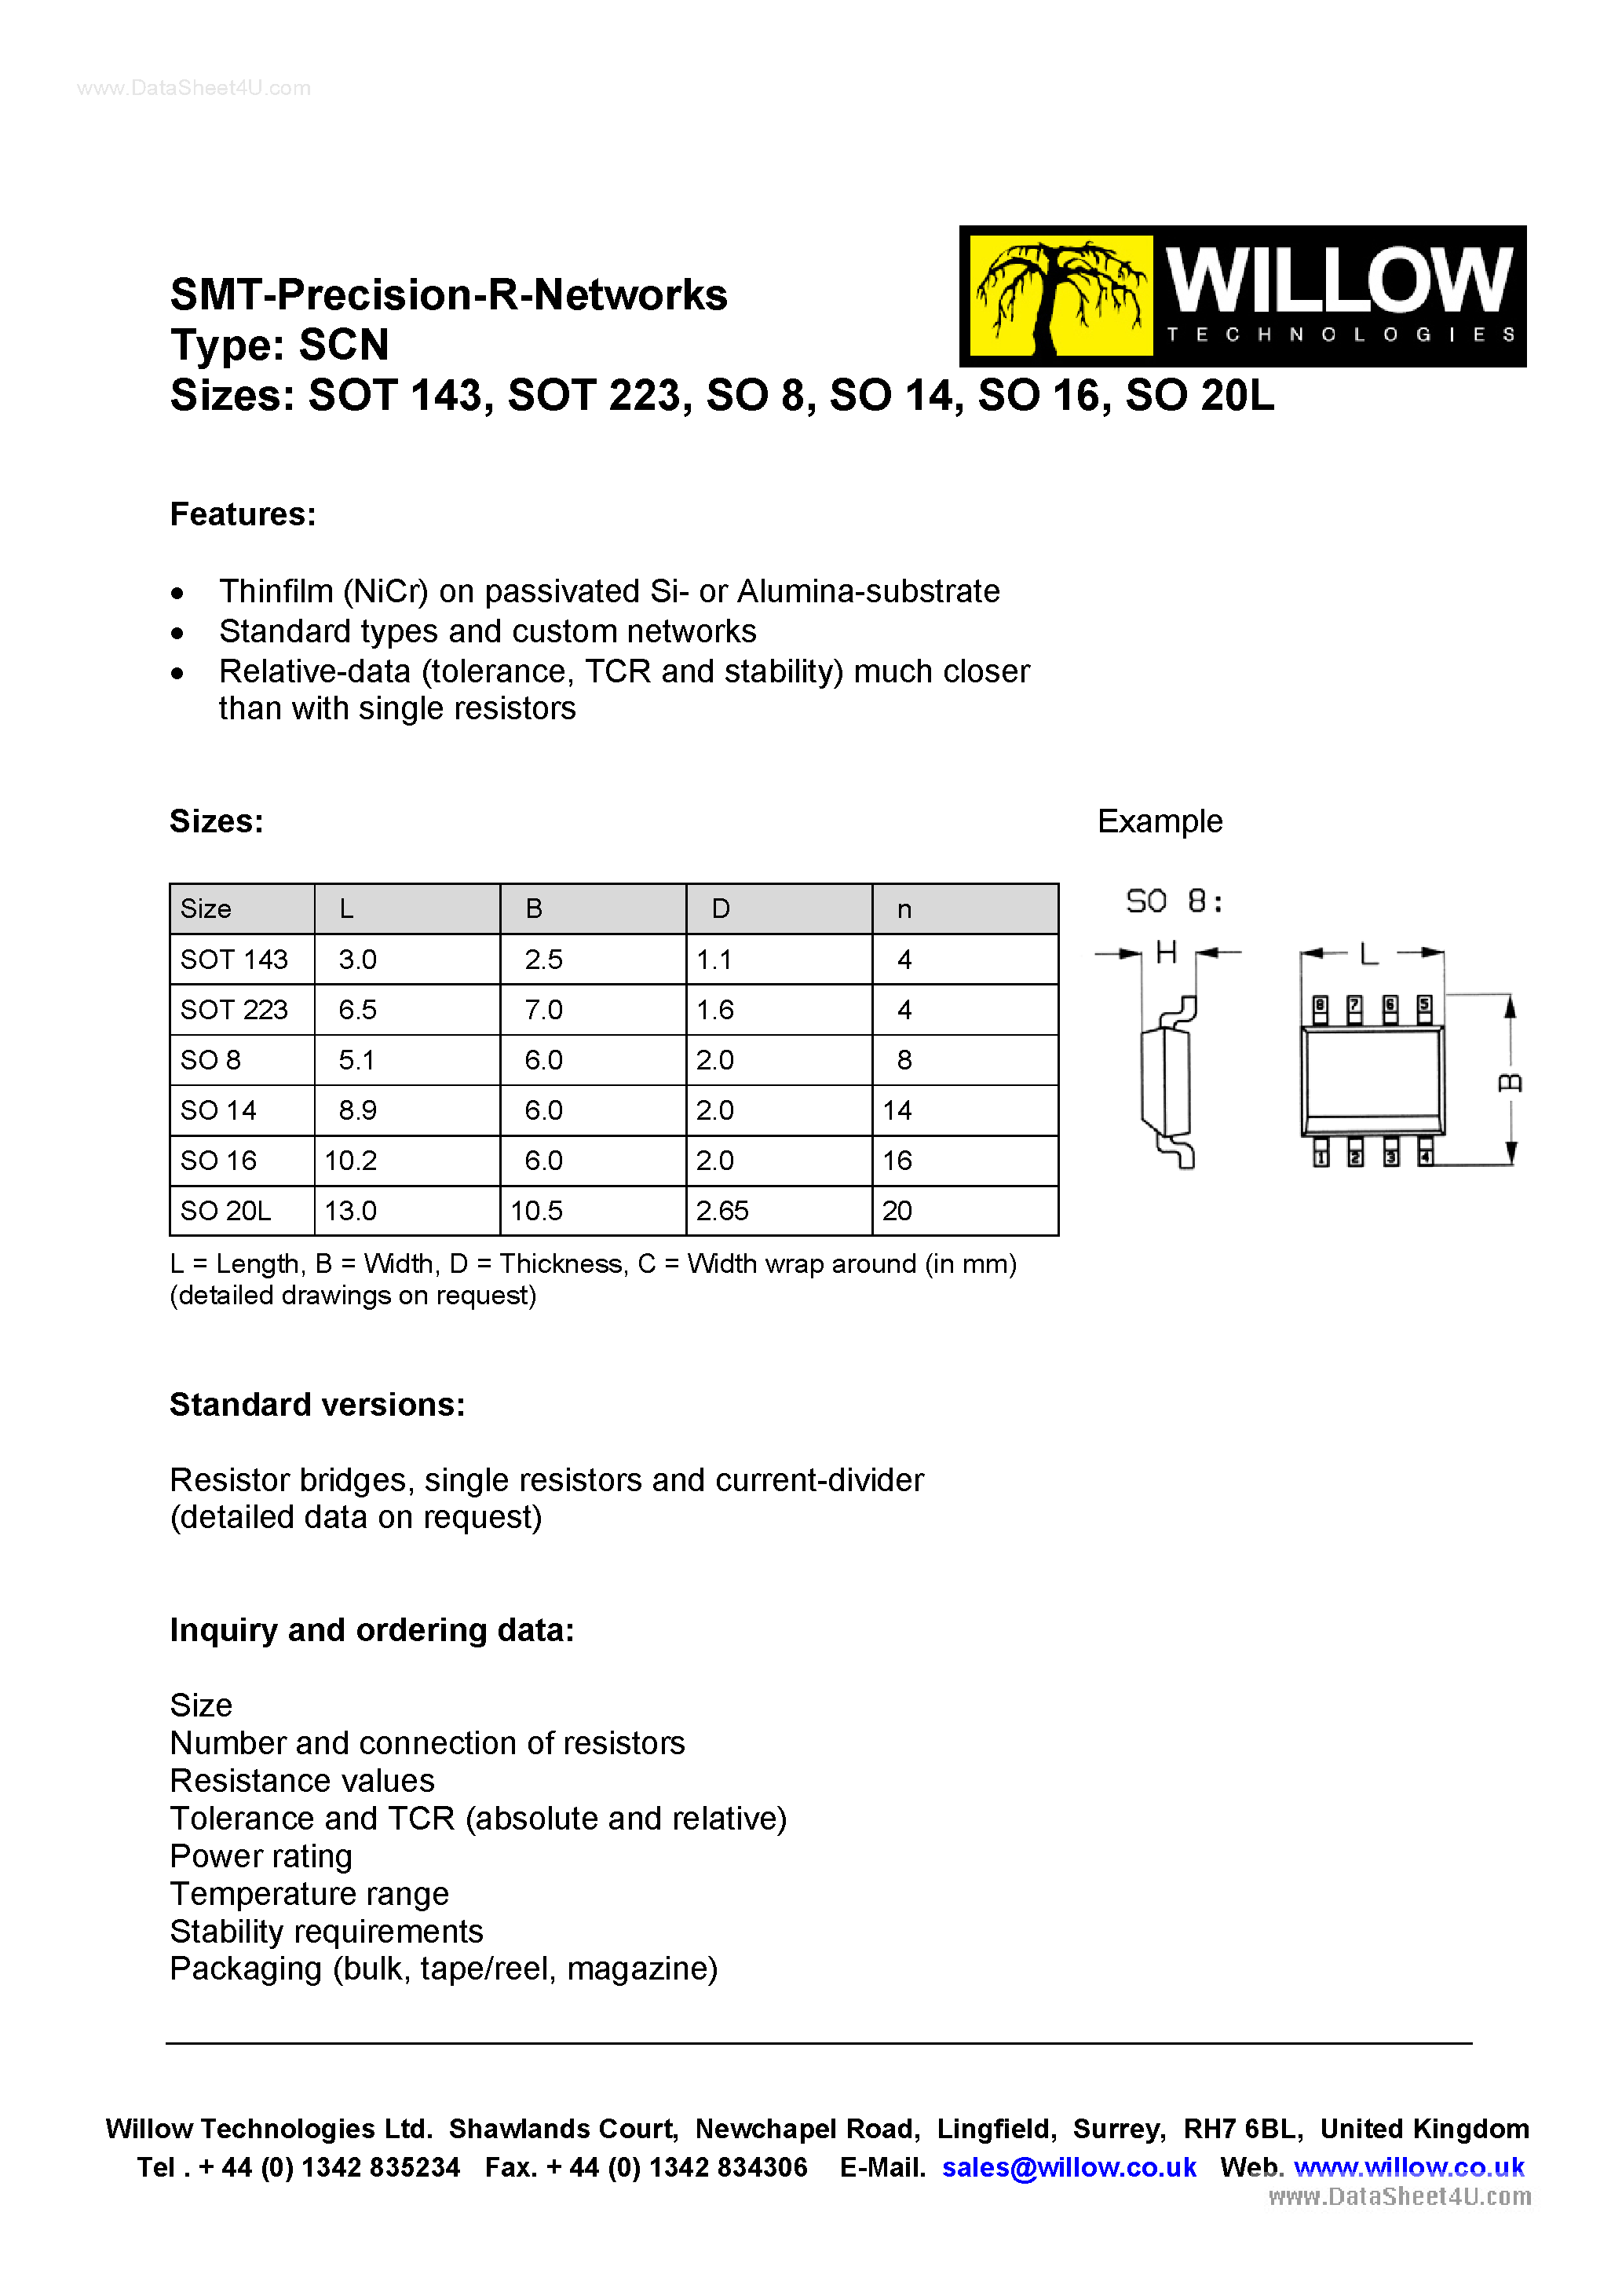 Datasheet SO14L - SMT-Precision-R-Networks page 1